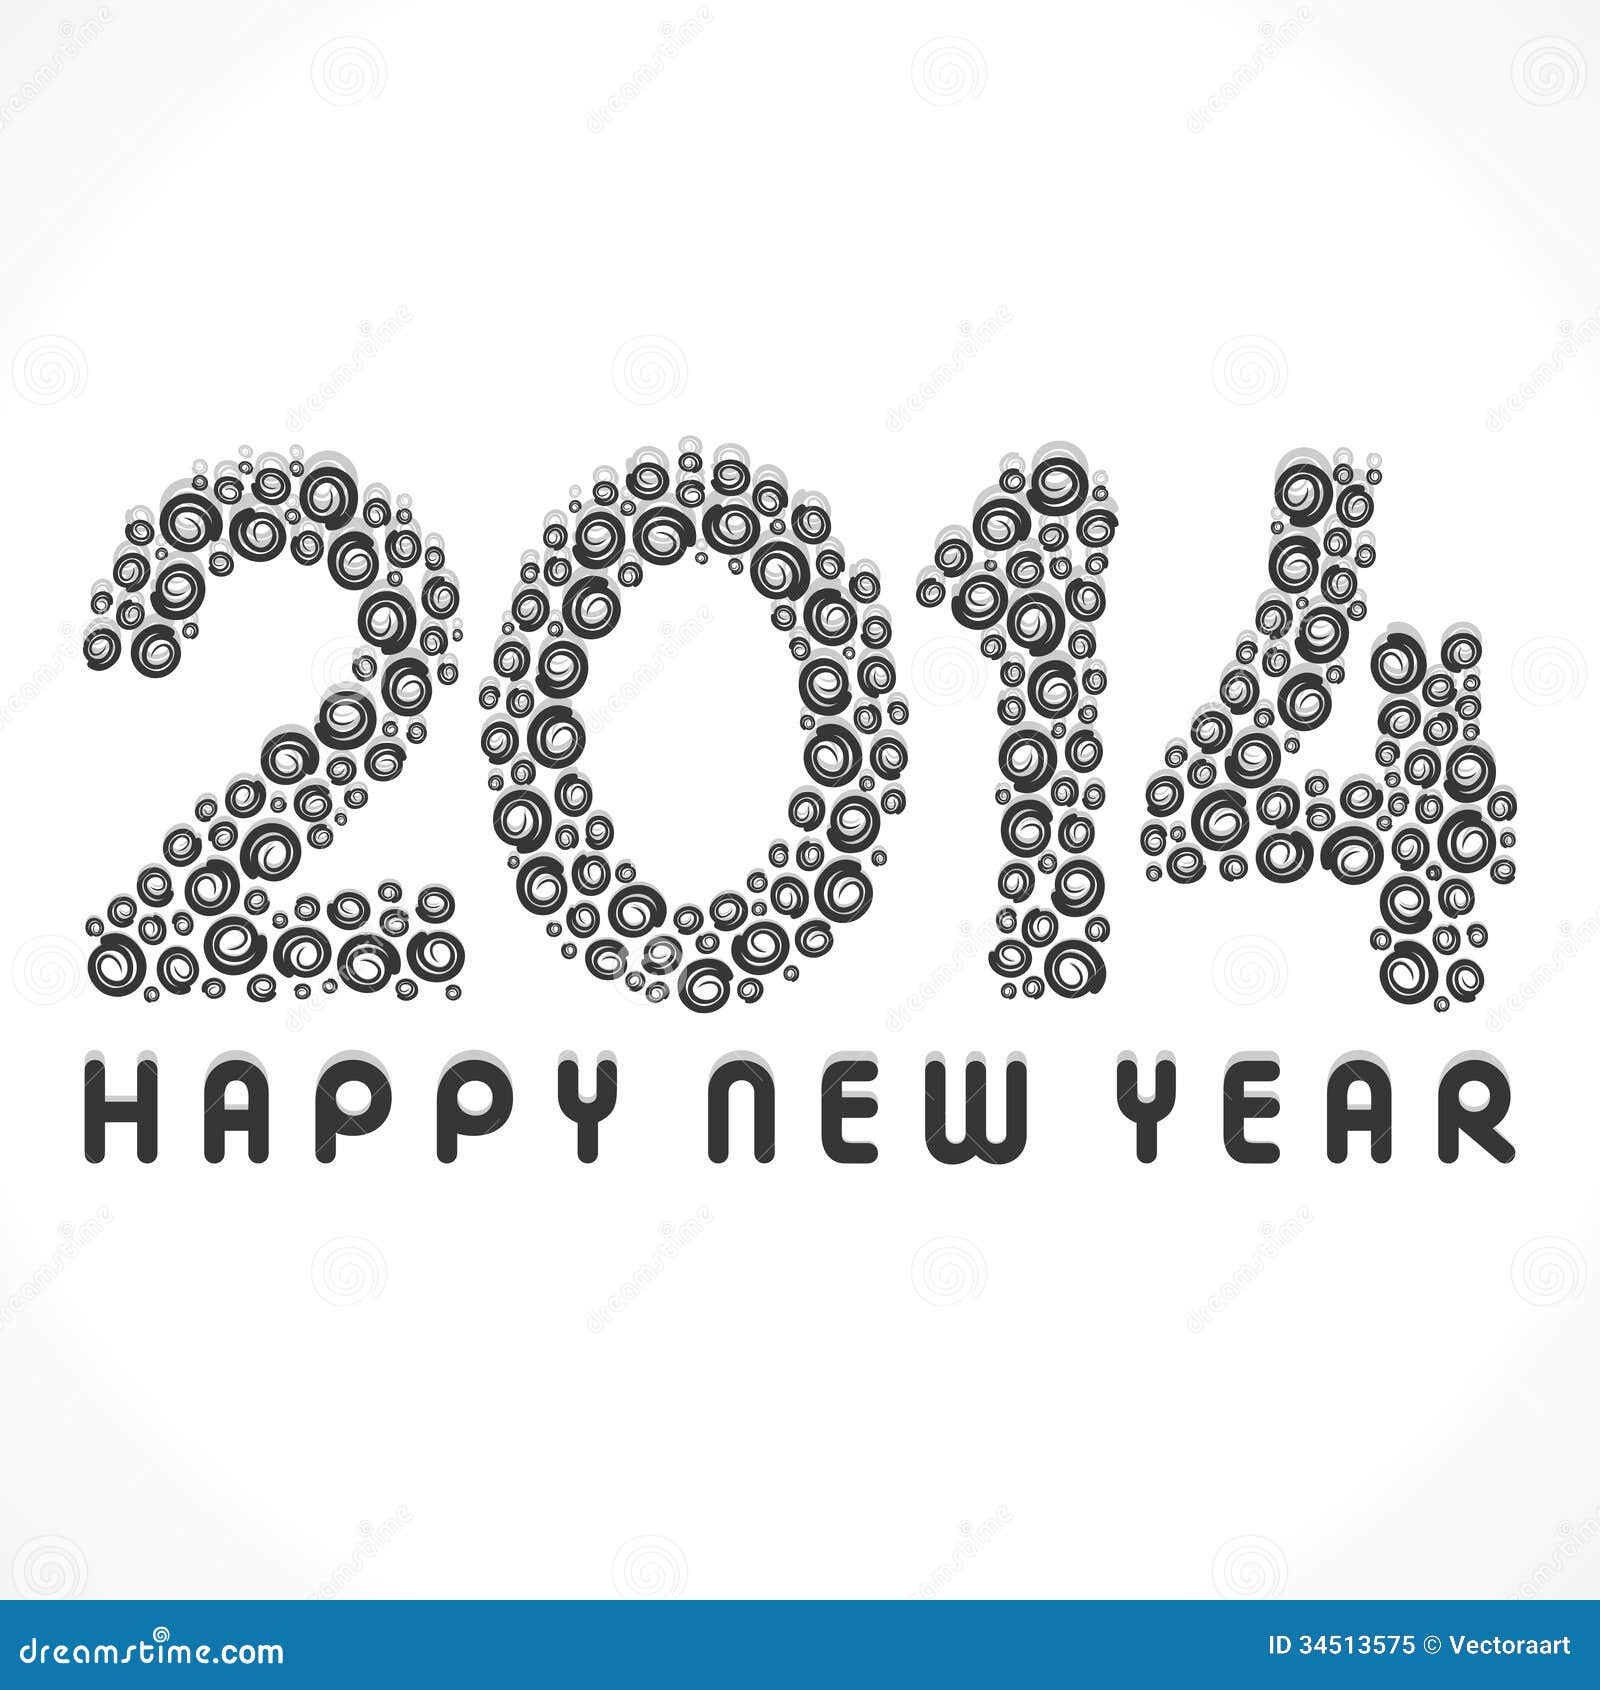 happy new year 2014 clip art black and white - photo #34